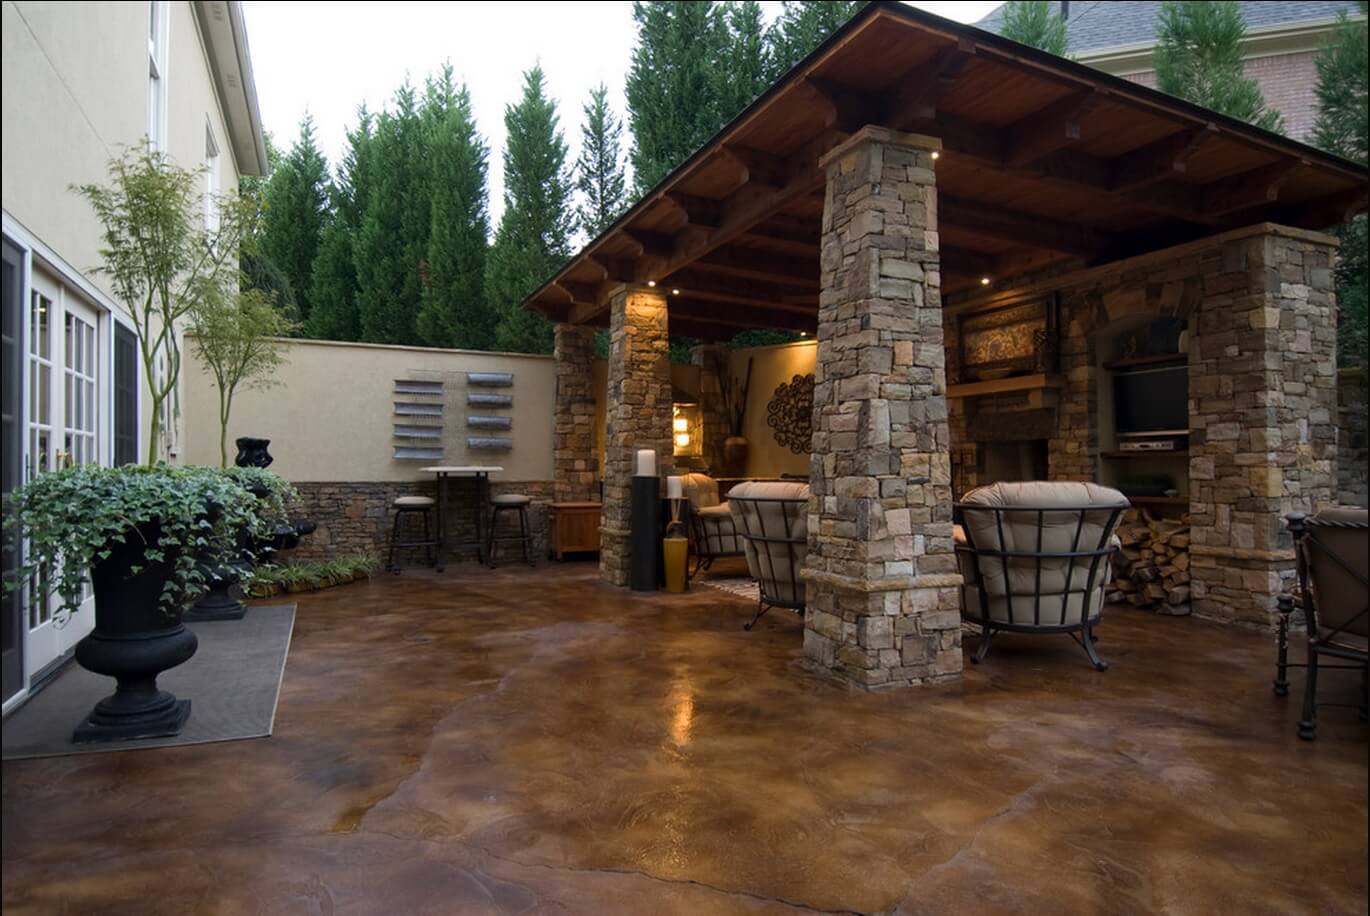 A patio with stone pillars and a grill: Stain Concrete Floors